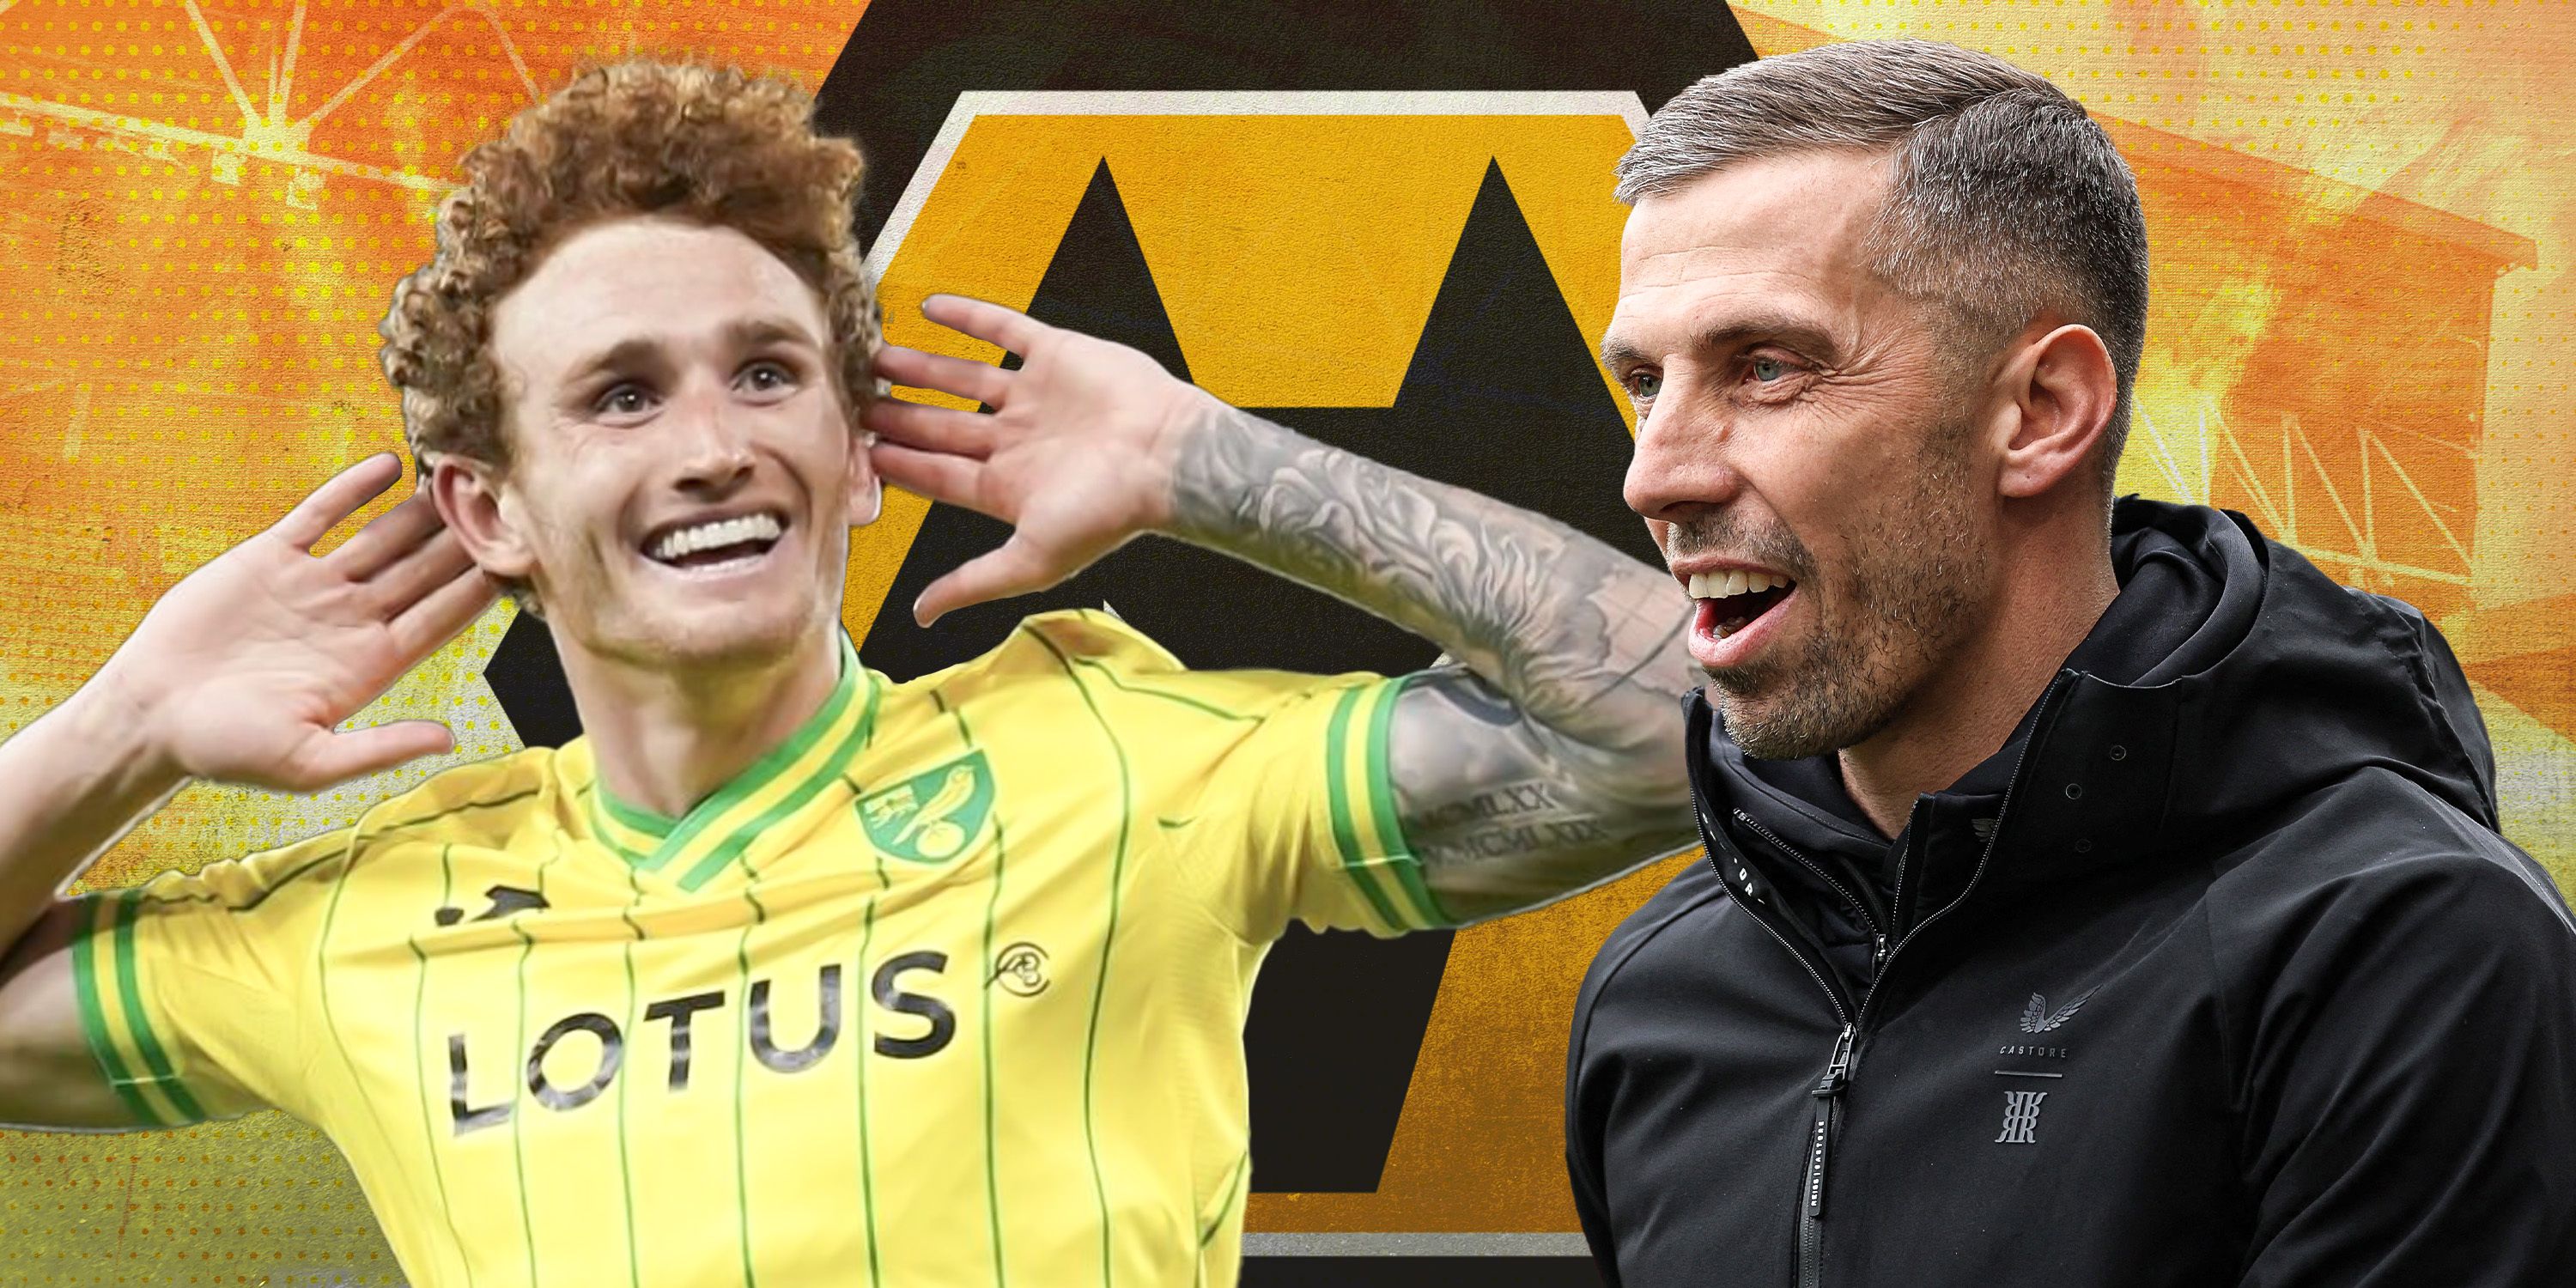 Norwich City striker Josh Sargent and Wolves manager Gary O'Neil